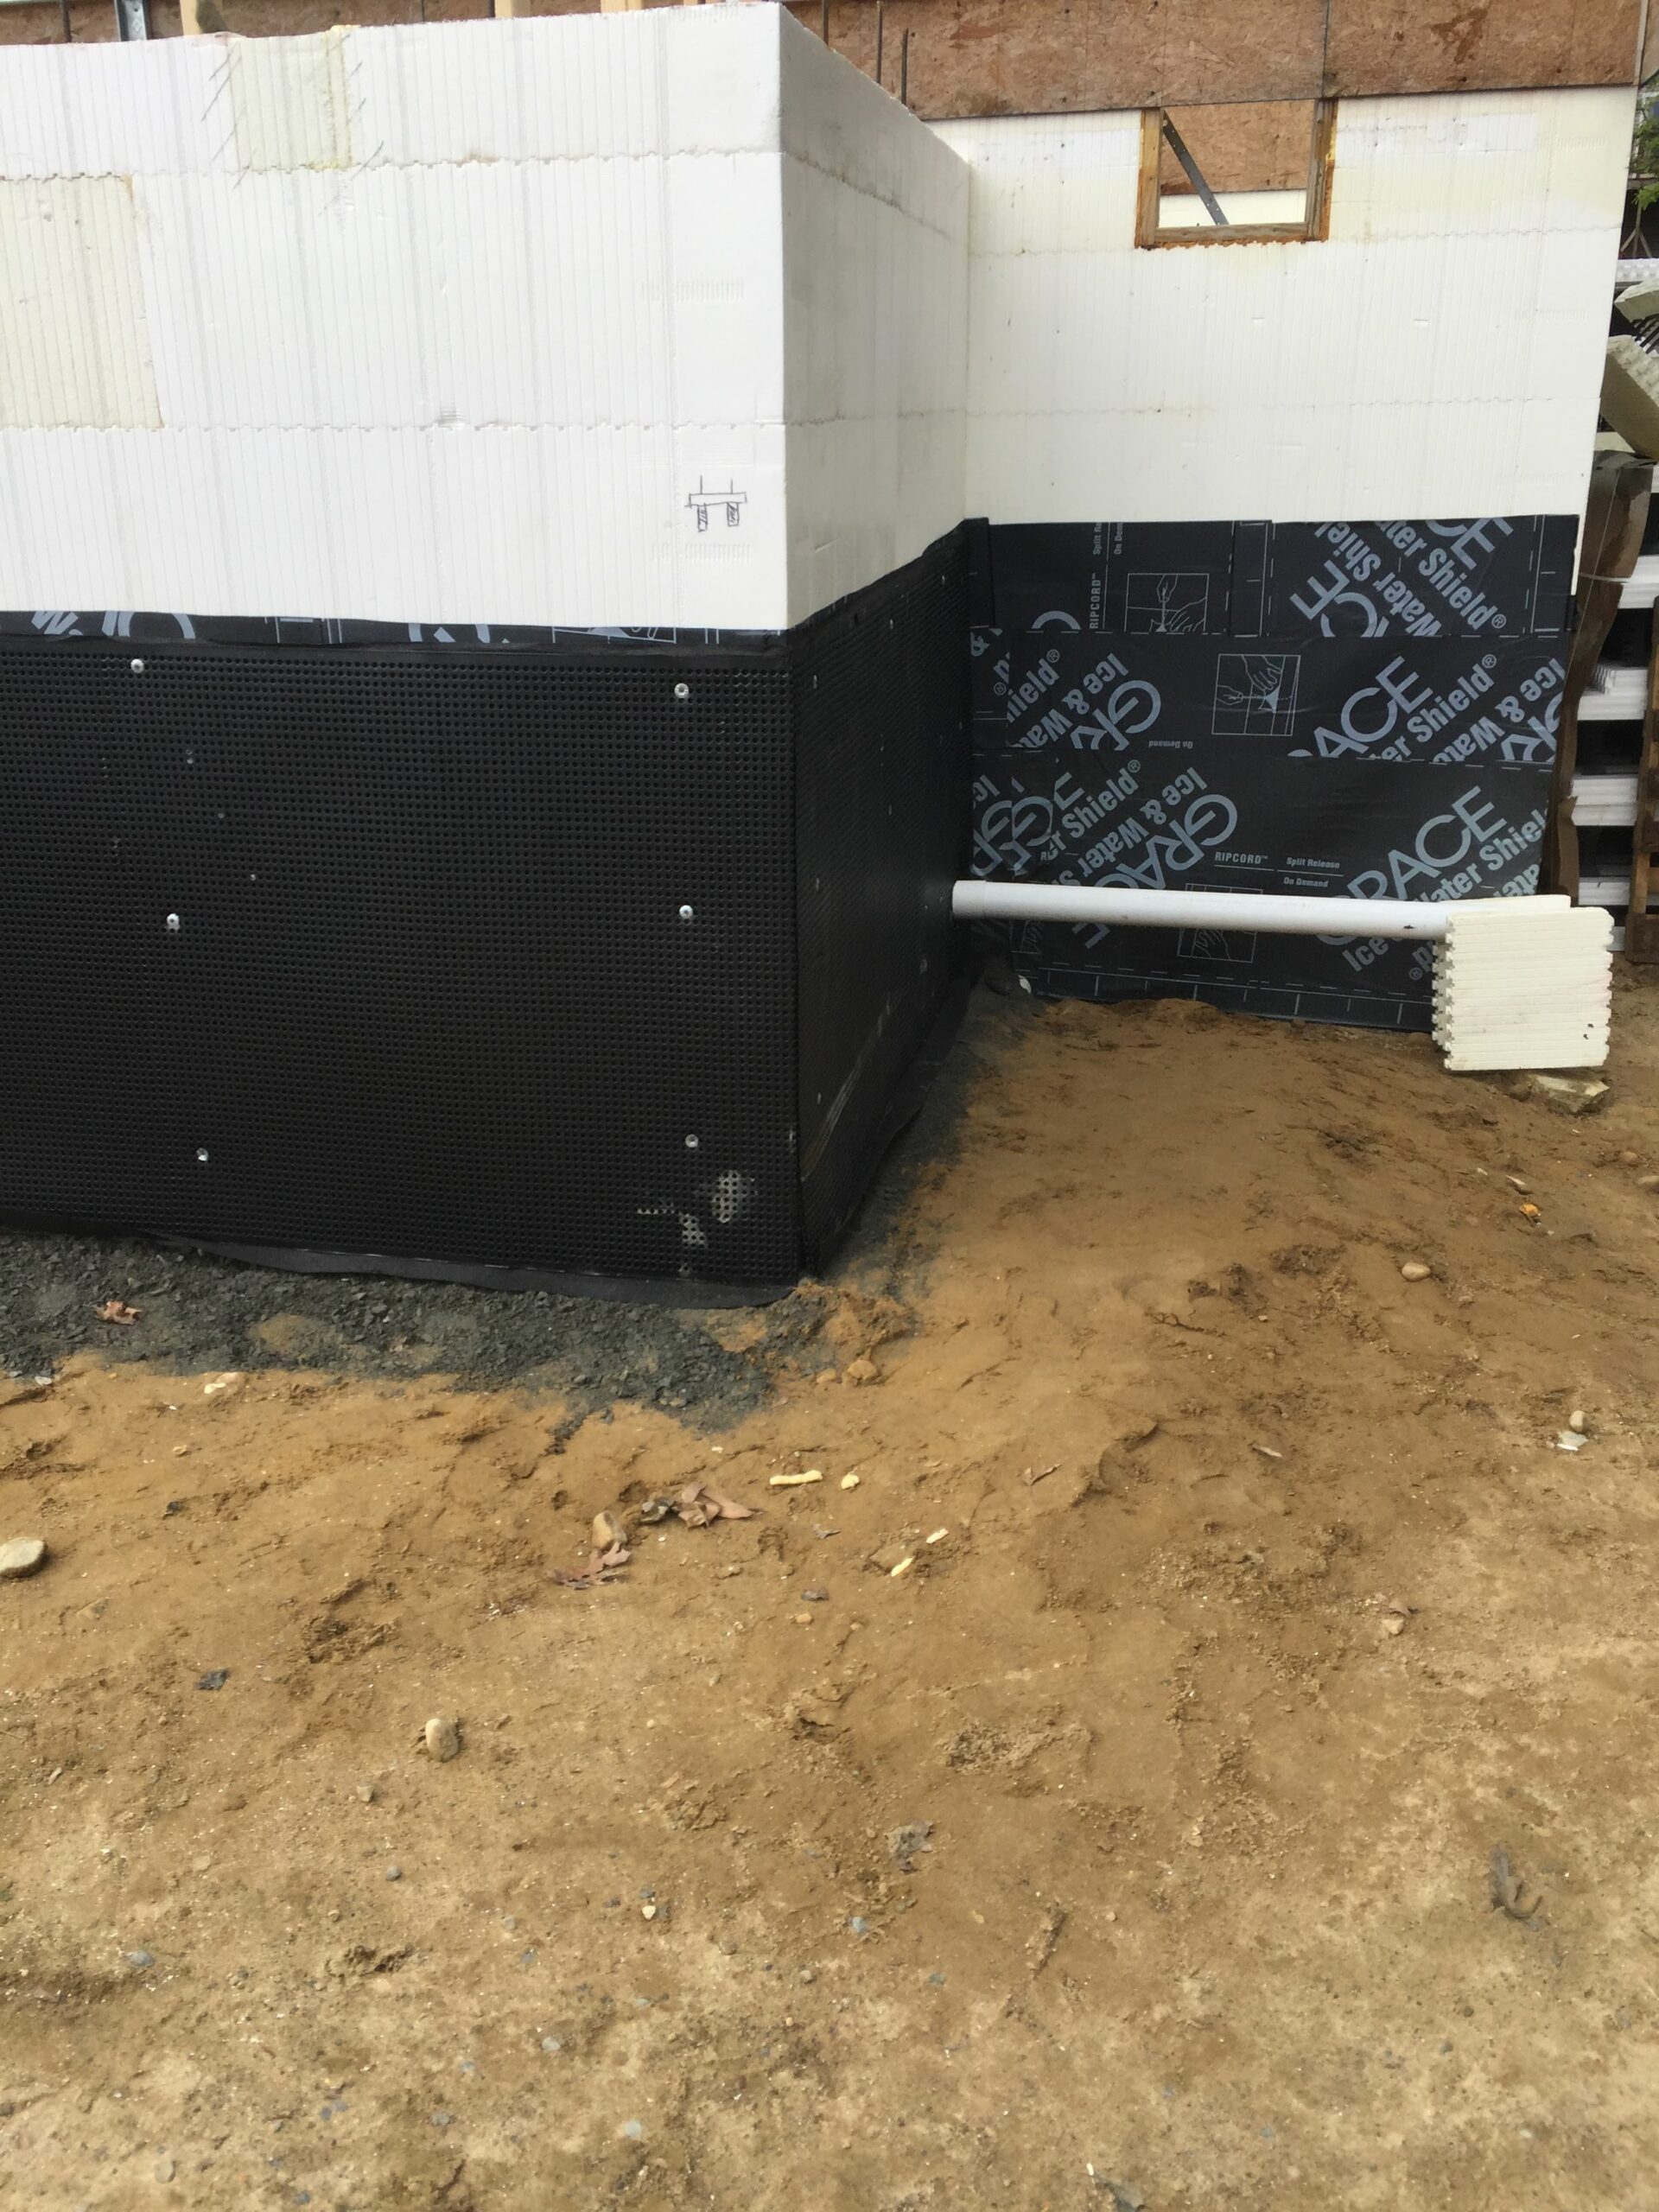 various waterproofing elements are seen on the side of an ICF home, including waterproof adhesive sealant with a plastic mould used for waterproofing on top of it.